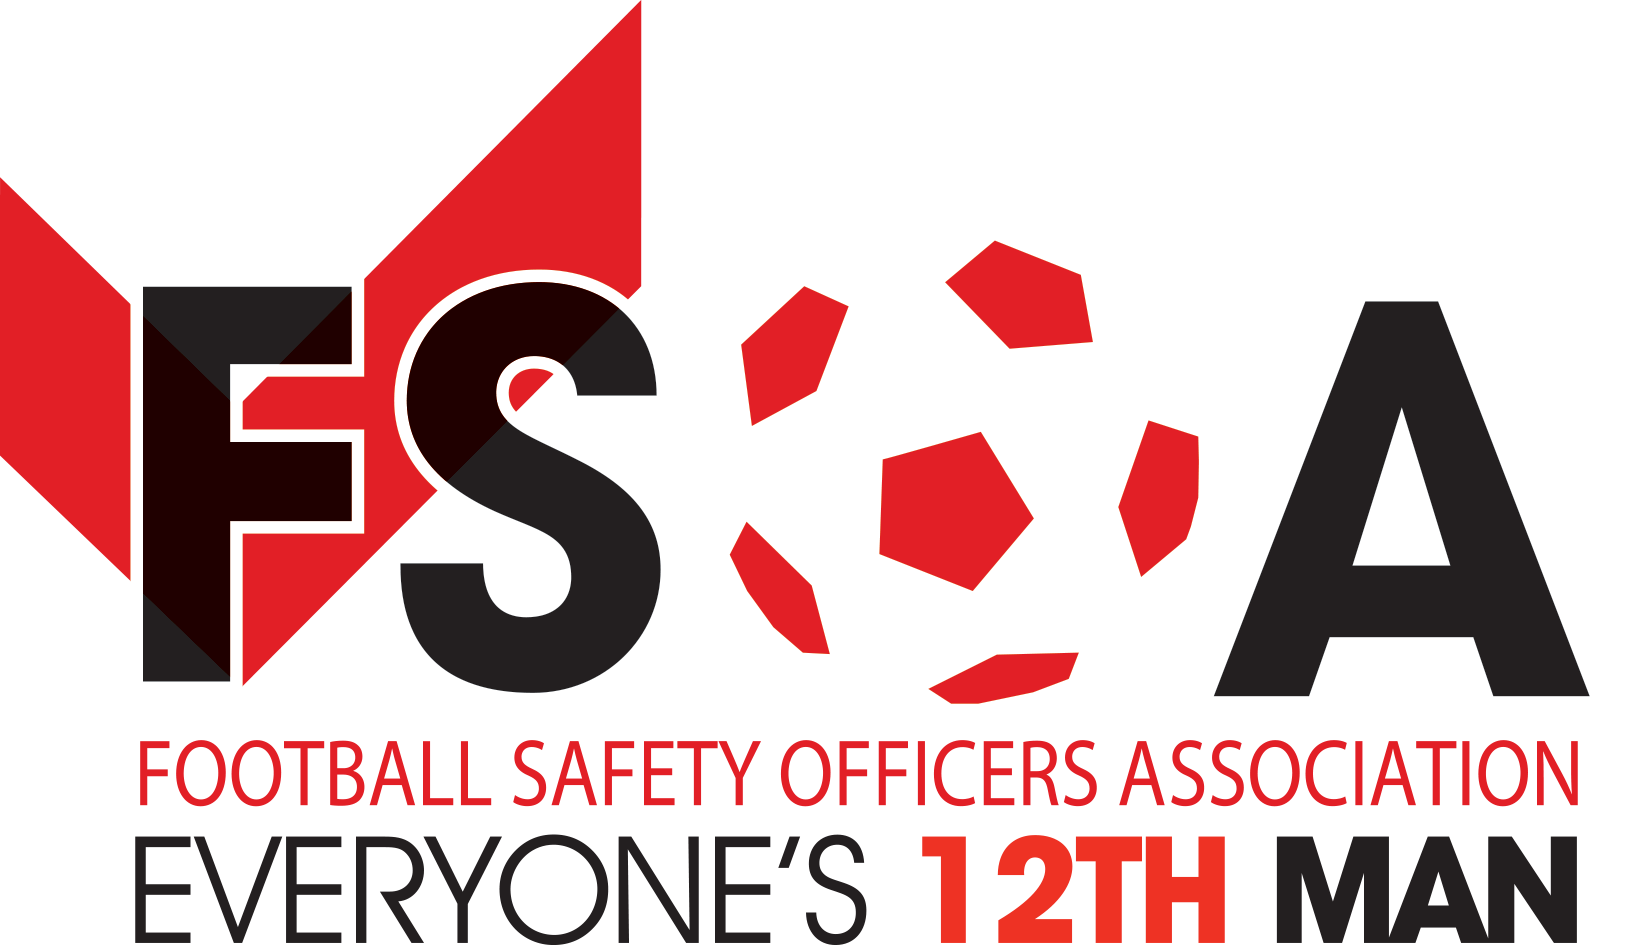 The Football Safety Officers Association